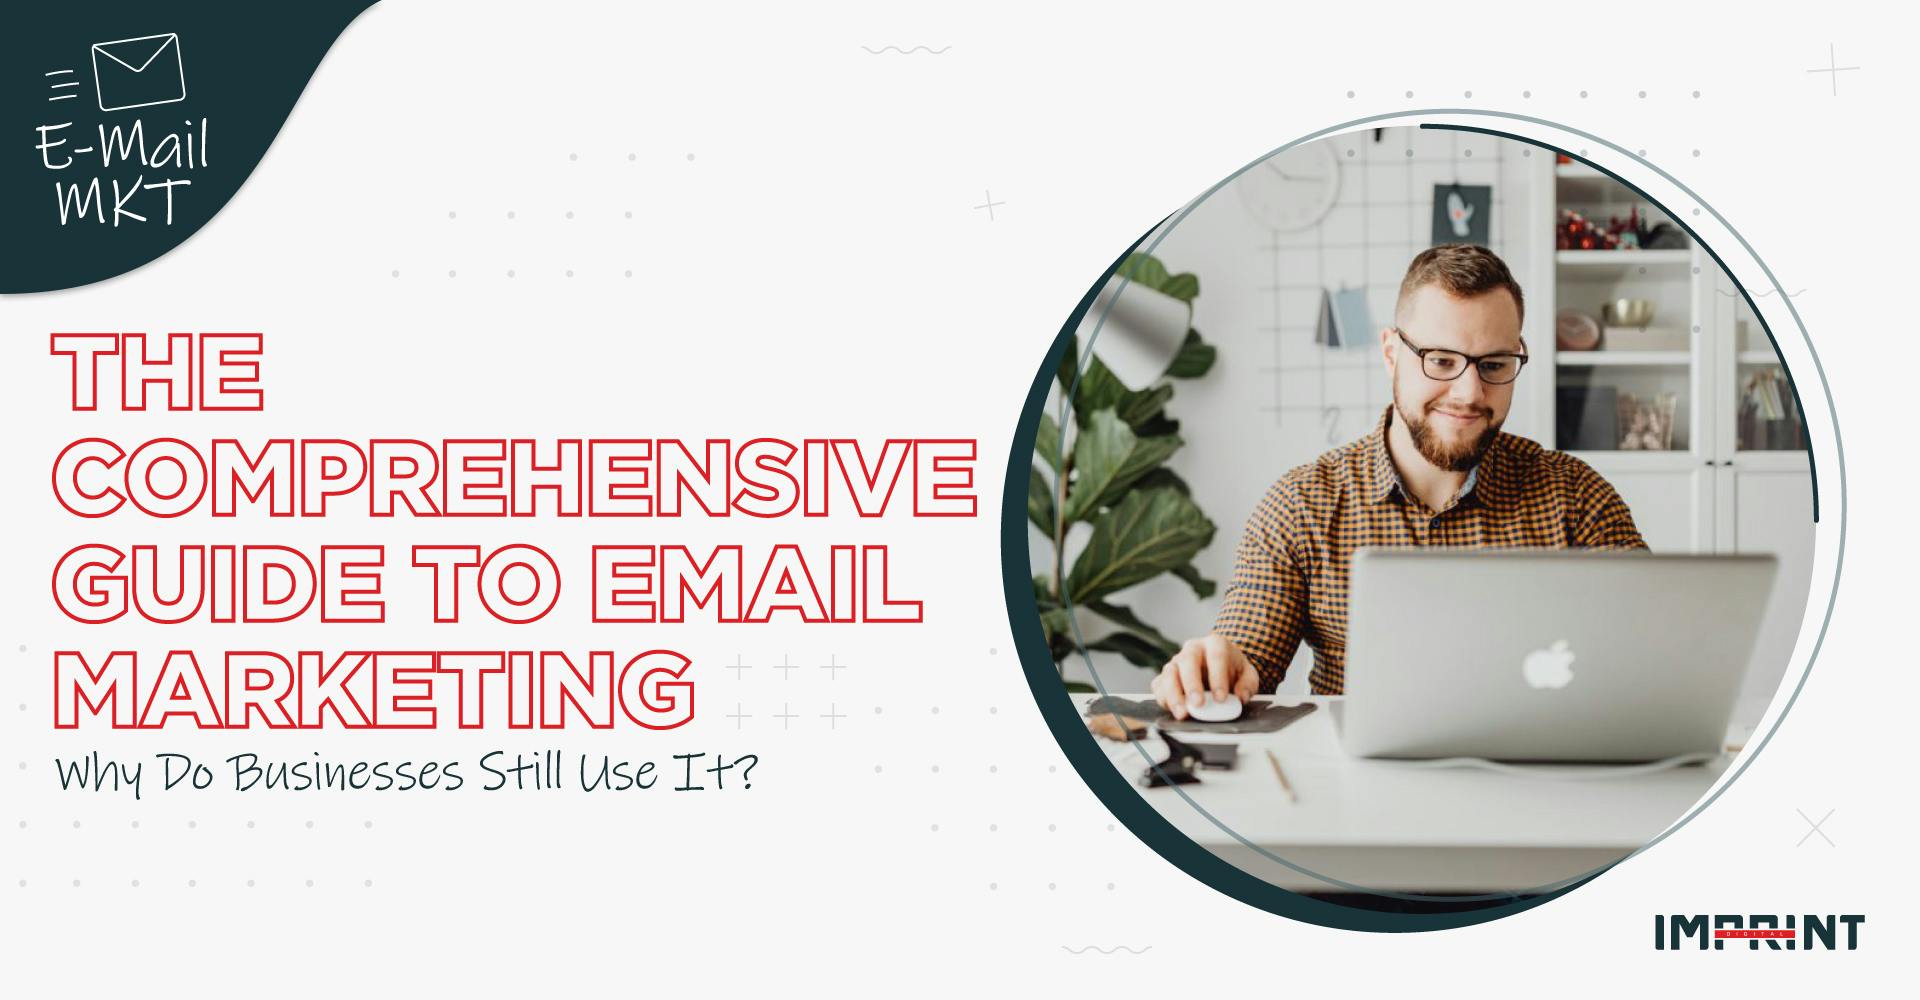 Email marketing remains important despite social media. Email marketing is a solid and cost-effective technique to promote.